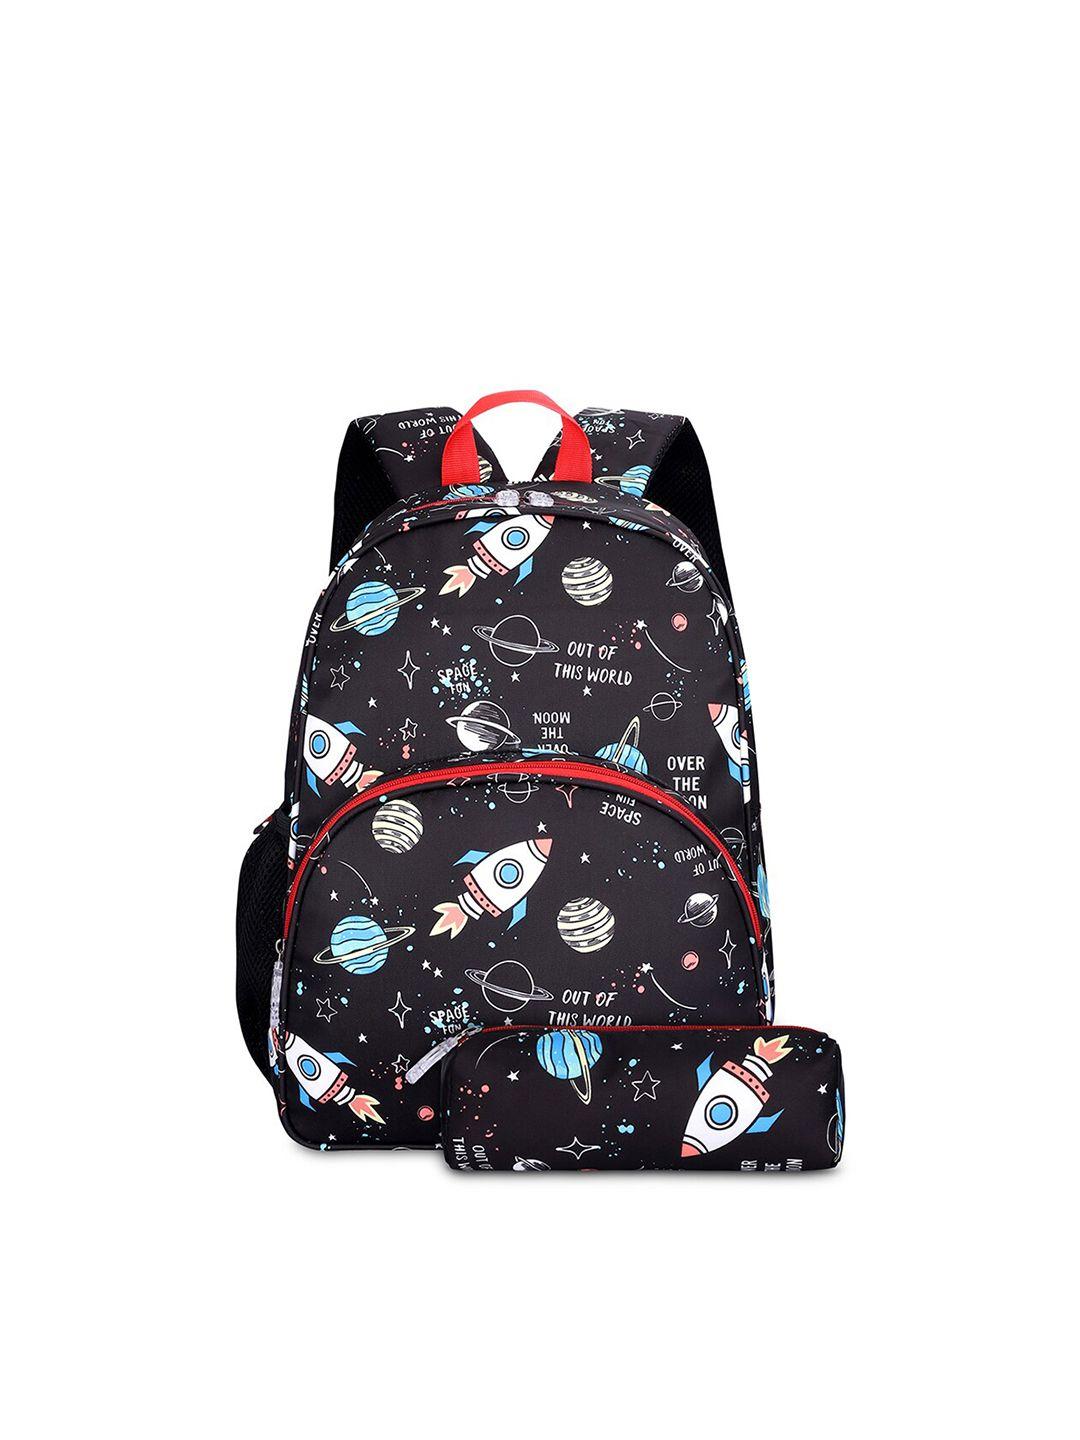 the-clownfish-kids-cosmic-critters-printed-water-resistant-ergonomic-backpack-with-pouch